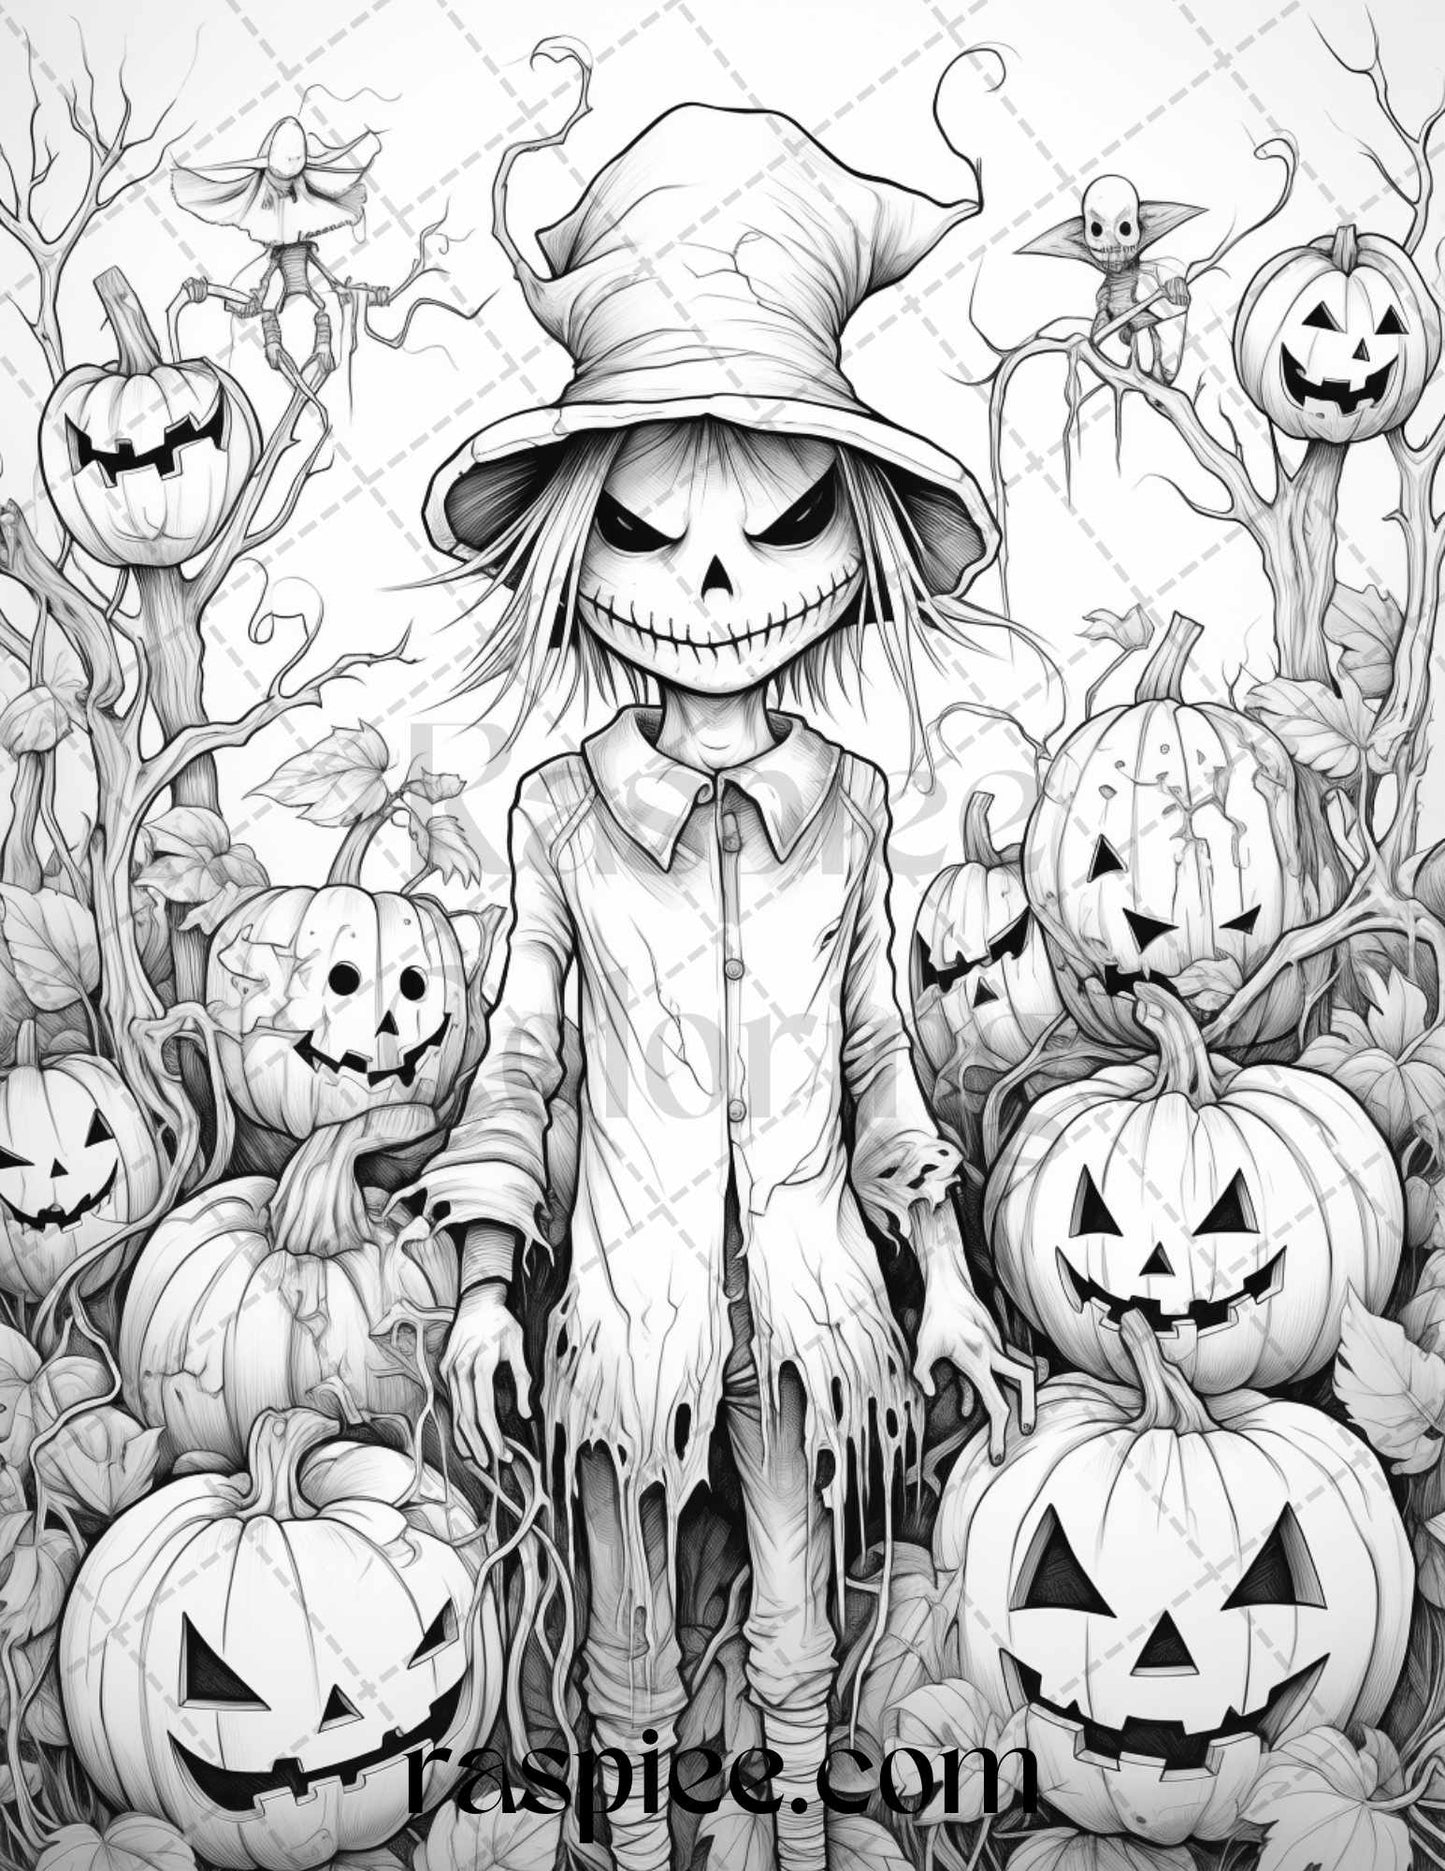 Halloween Scarecrow Coloring Page, Printable Halloween Coloring Book, Grayscale Scarecrow Designs, Adult Coloring Pages, DIY Halloween Decorations, Halloween Coloring Pages for Adults, Halloween Coloring Sheets, Halloween Grayscale Coloring Pages